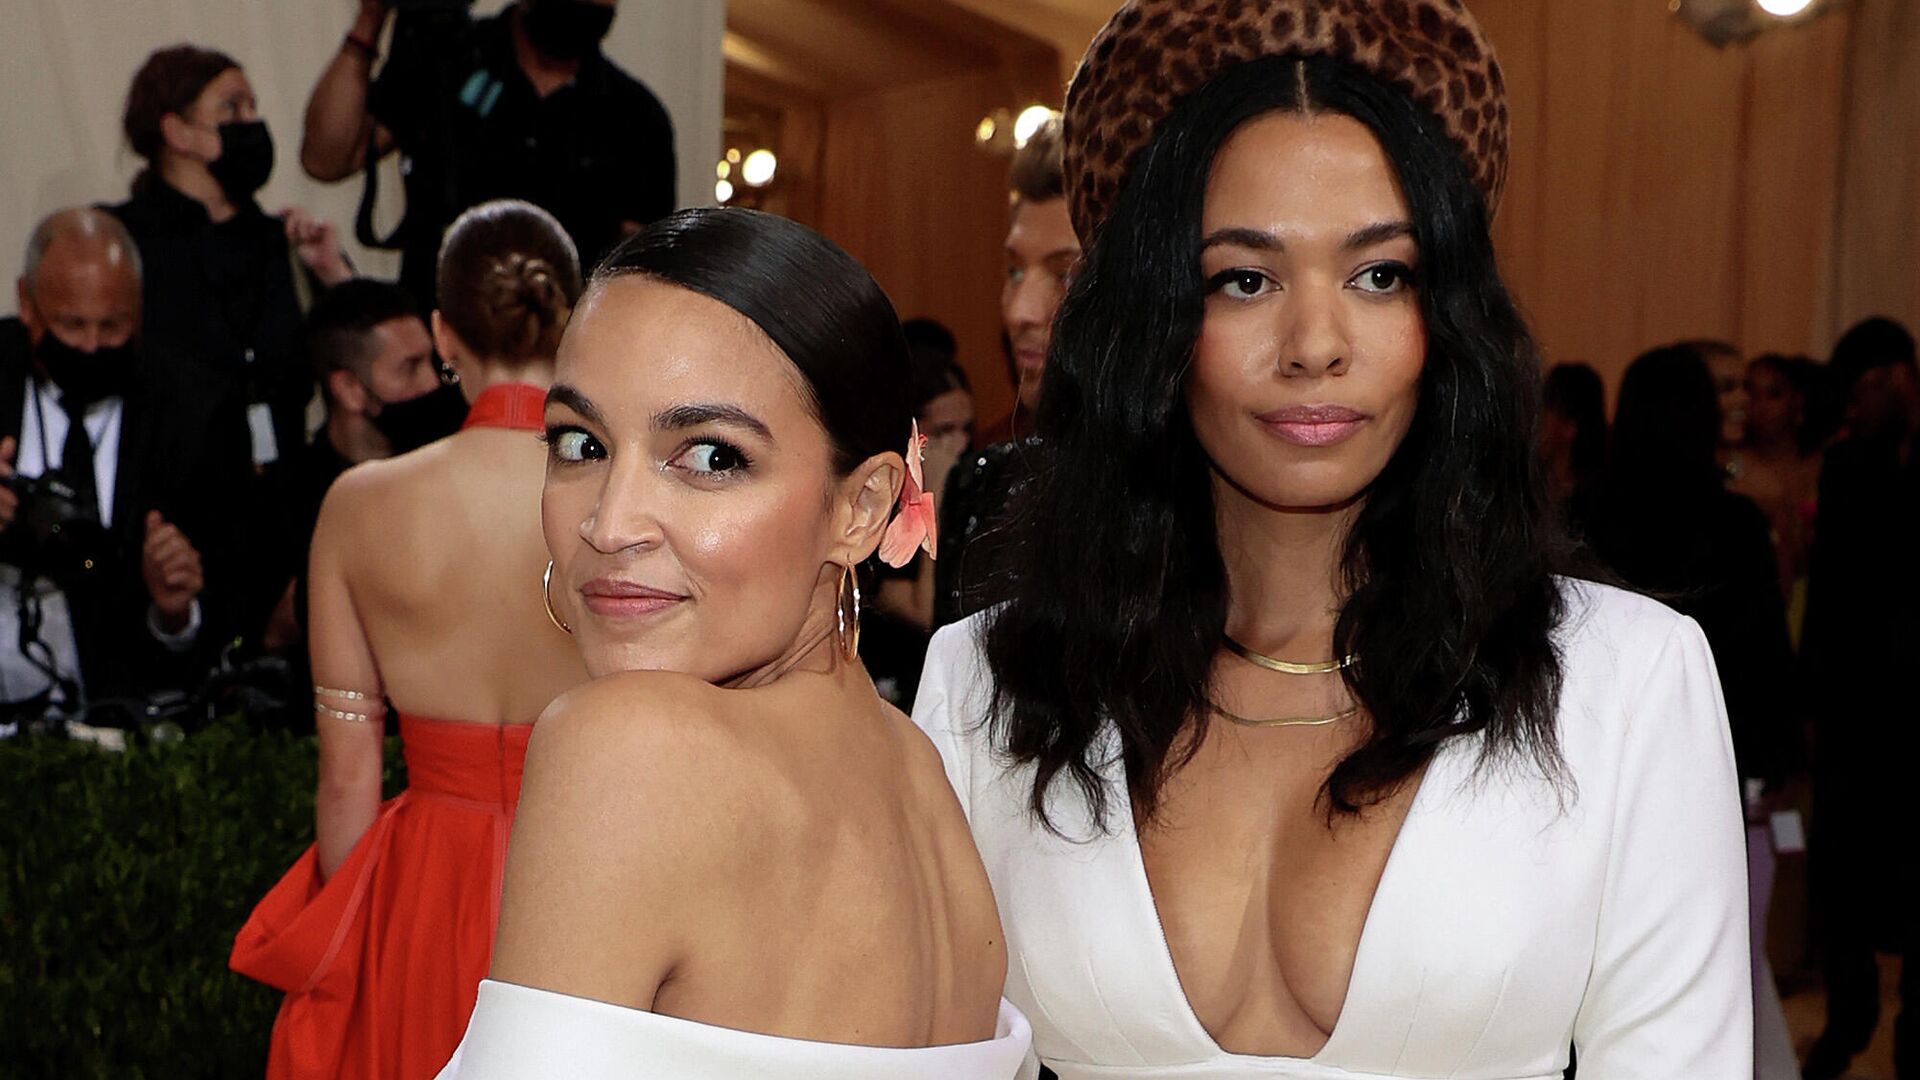 Alexandria Ocasio-Cortez and Aurora James attend The 2021 Met Gala Celebrating In America: A Lexicon Of Fashion at Metropolitan Museum of Art on September 13, 2021 in New York City - Sputnik International, 1920, 14.09.2021